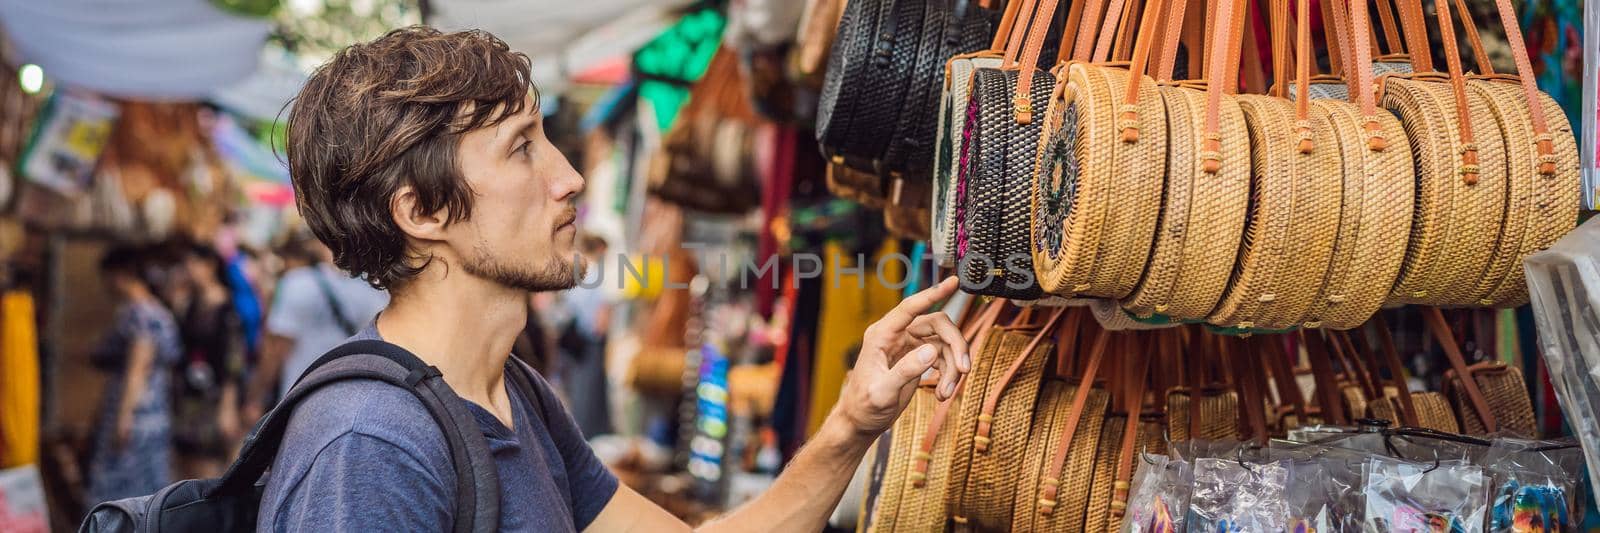 Man at a market in Ubud, Bali. Typical souvenir shop selling souvenirs and handicrafts of Bali at the famous Ubud Market, Indonesia. Balinese market. Souvenirs of wood and crafts of local residents BANNER, LONG FORMAT by galitskaya